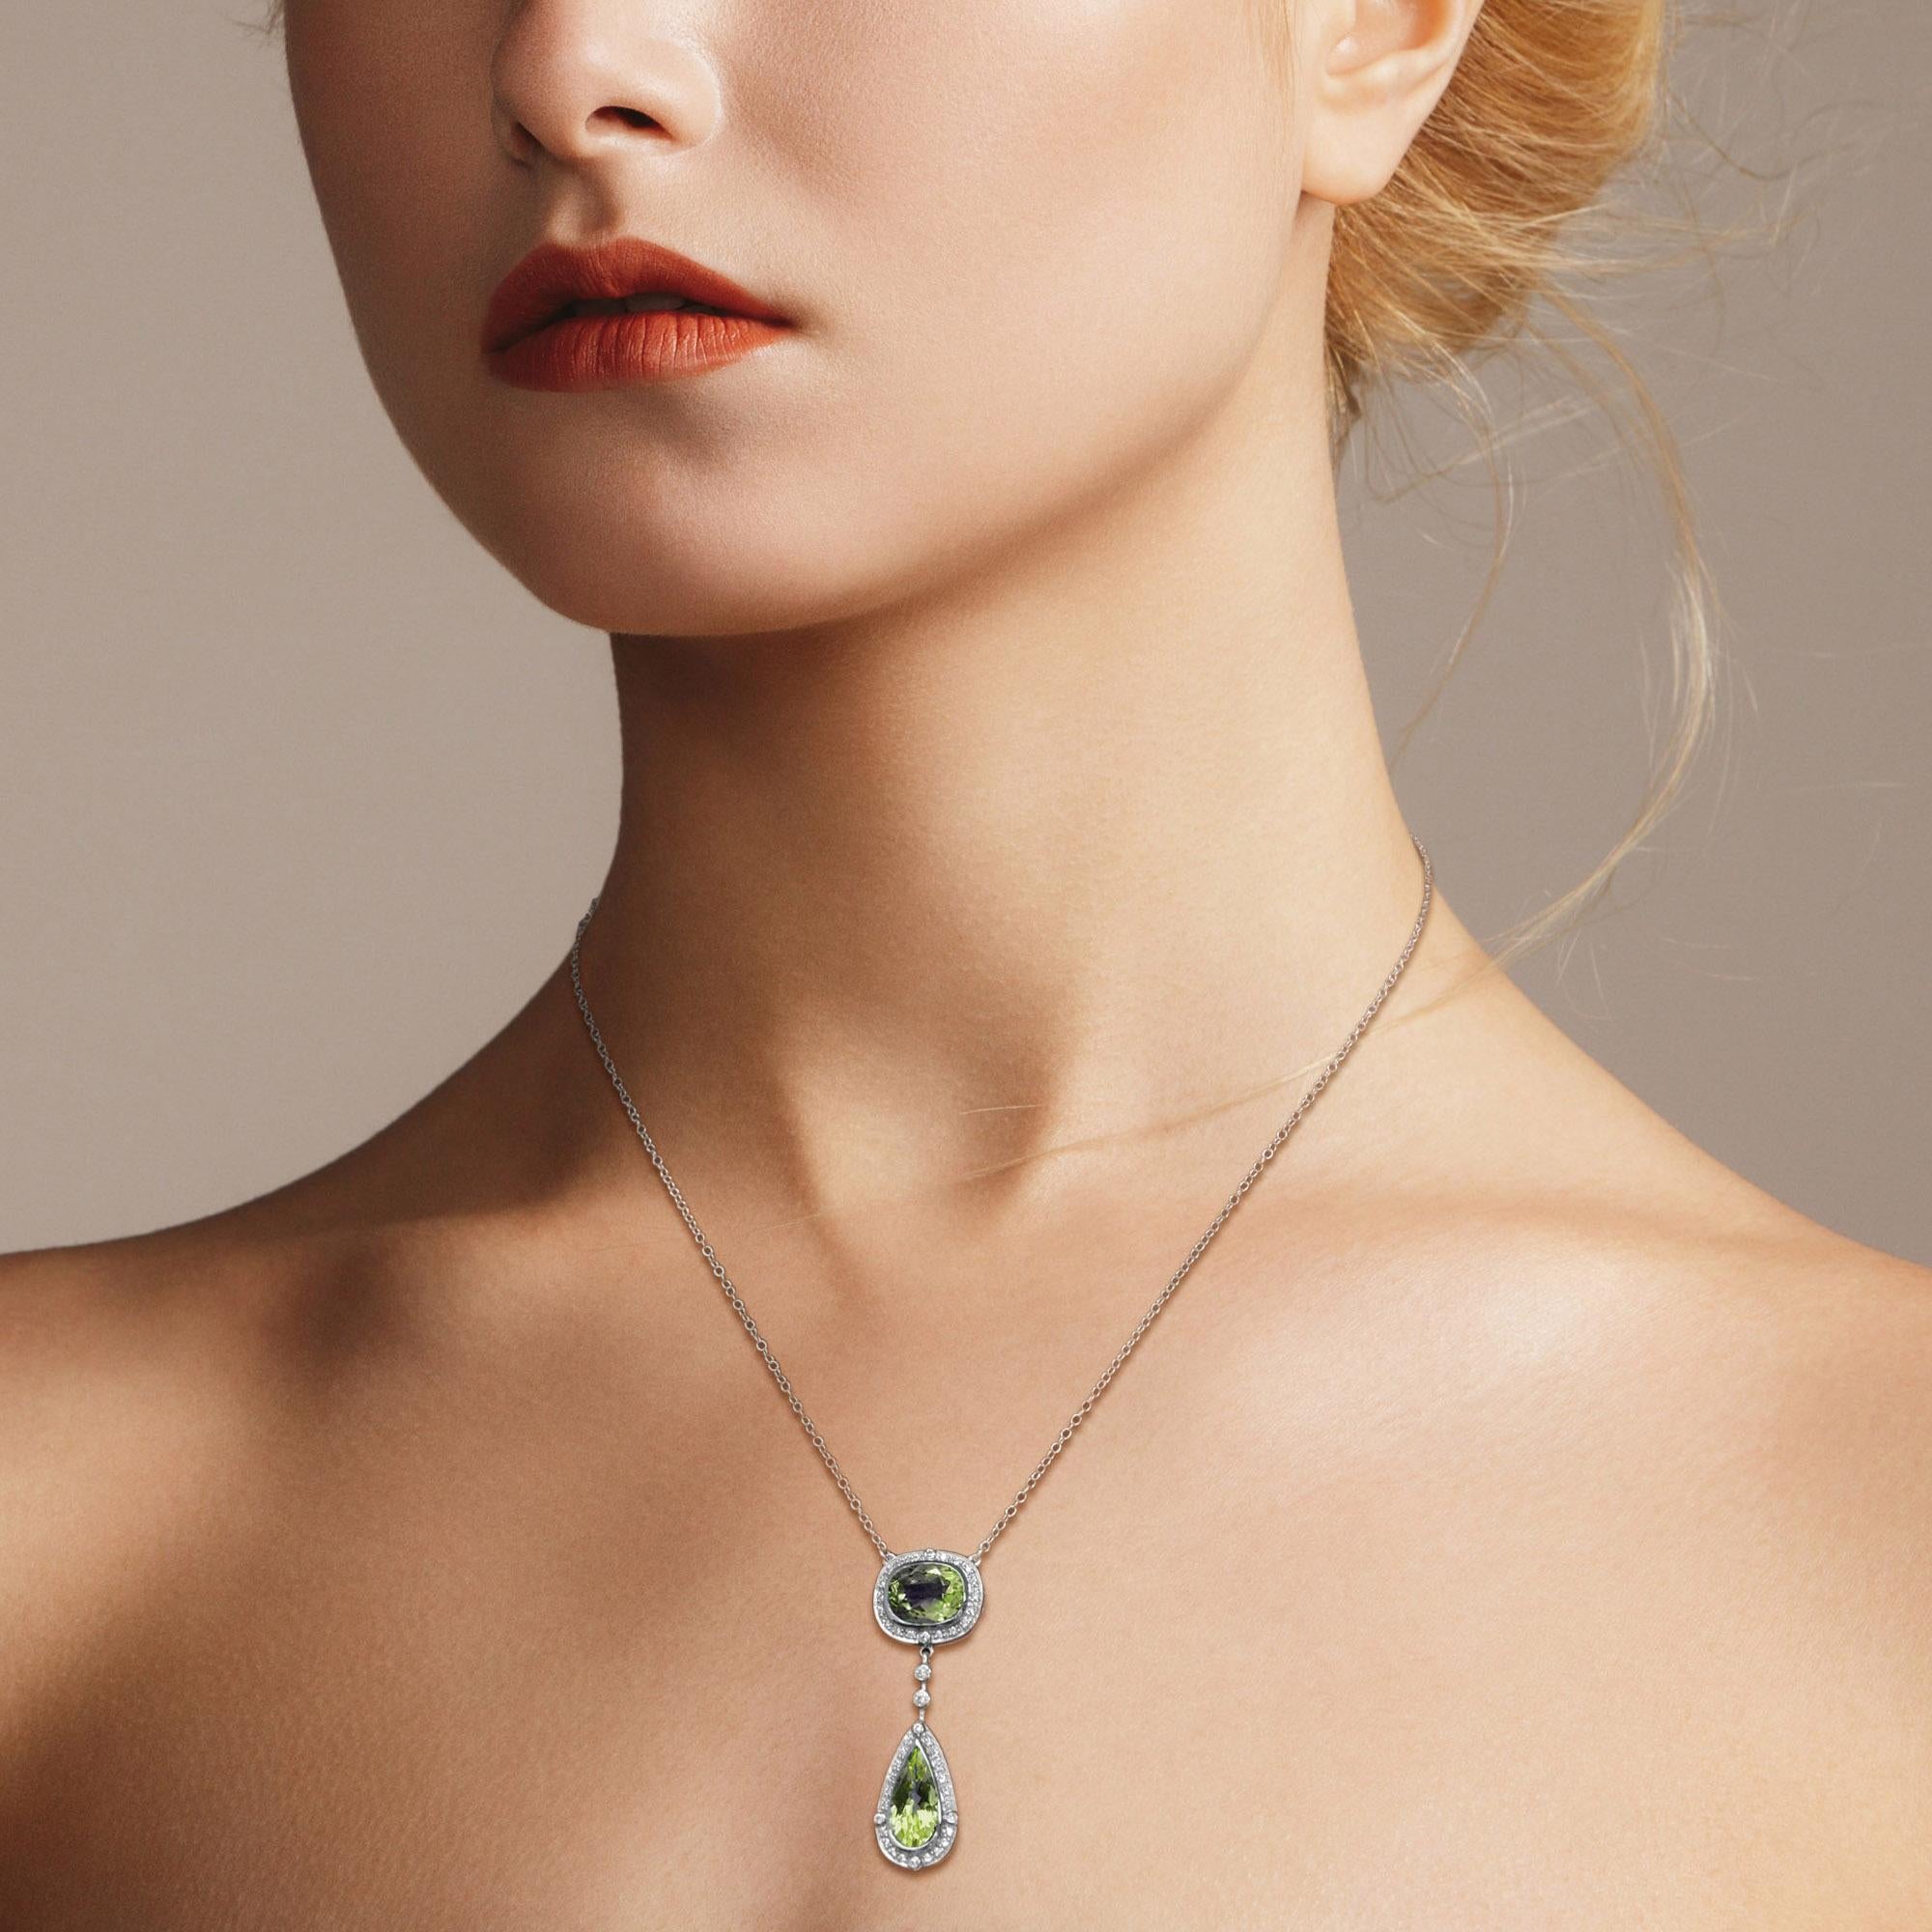 Create a stunning and adorable look with this double-drop peridot and diamond accent necklace! Cut to the mesmerizing, faceted cushion and pear shape. Adding to the stunning design, 0.37 carat round diamonds beautifully outline the focus gemstones.